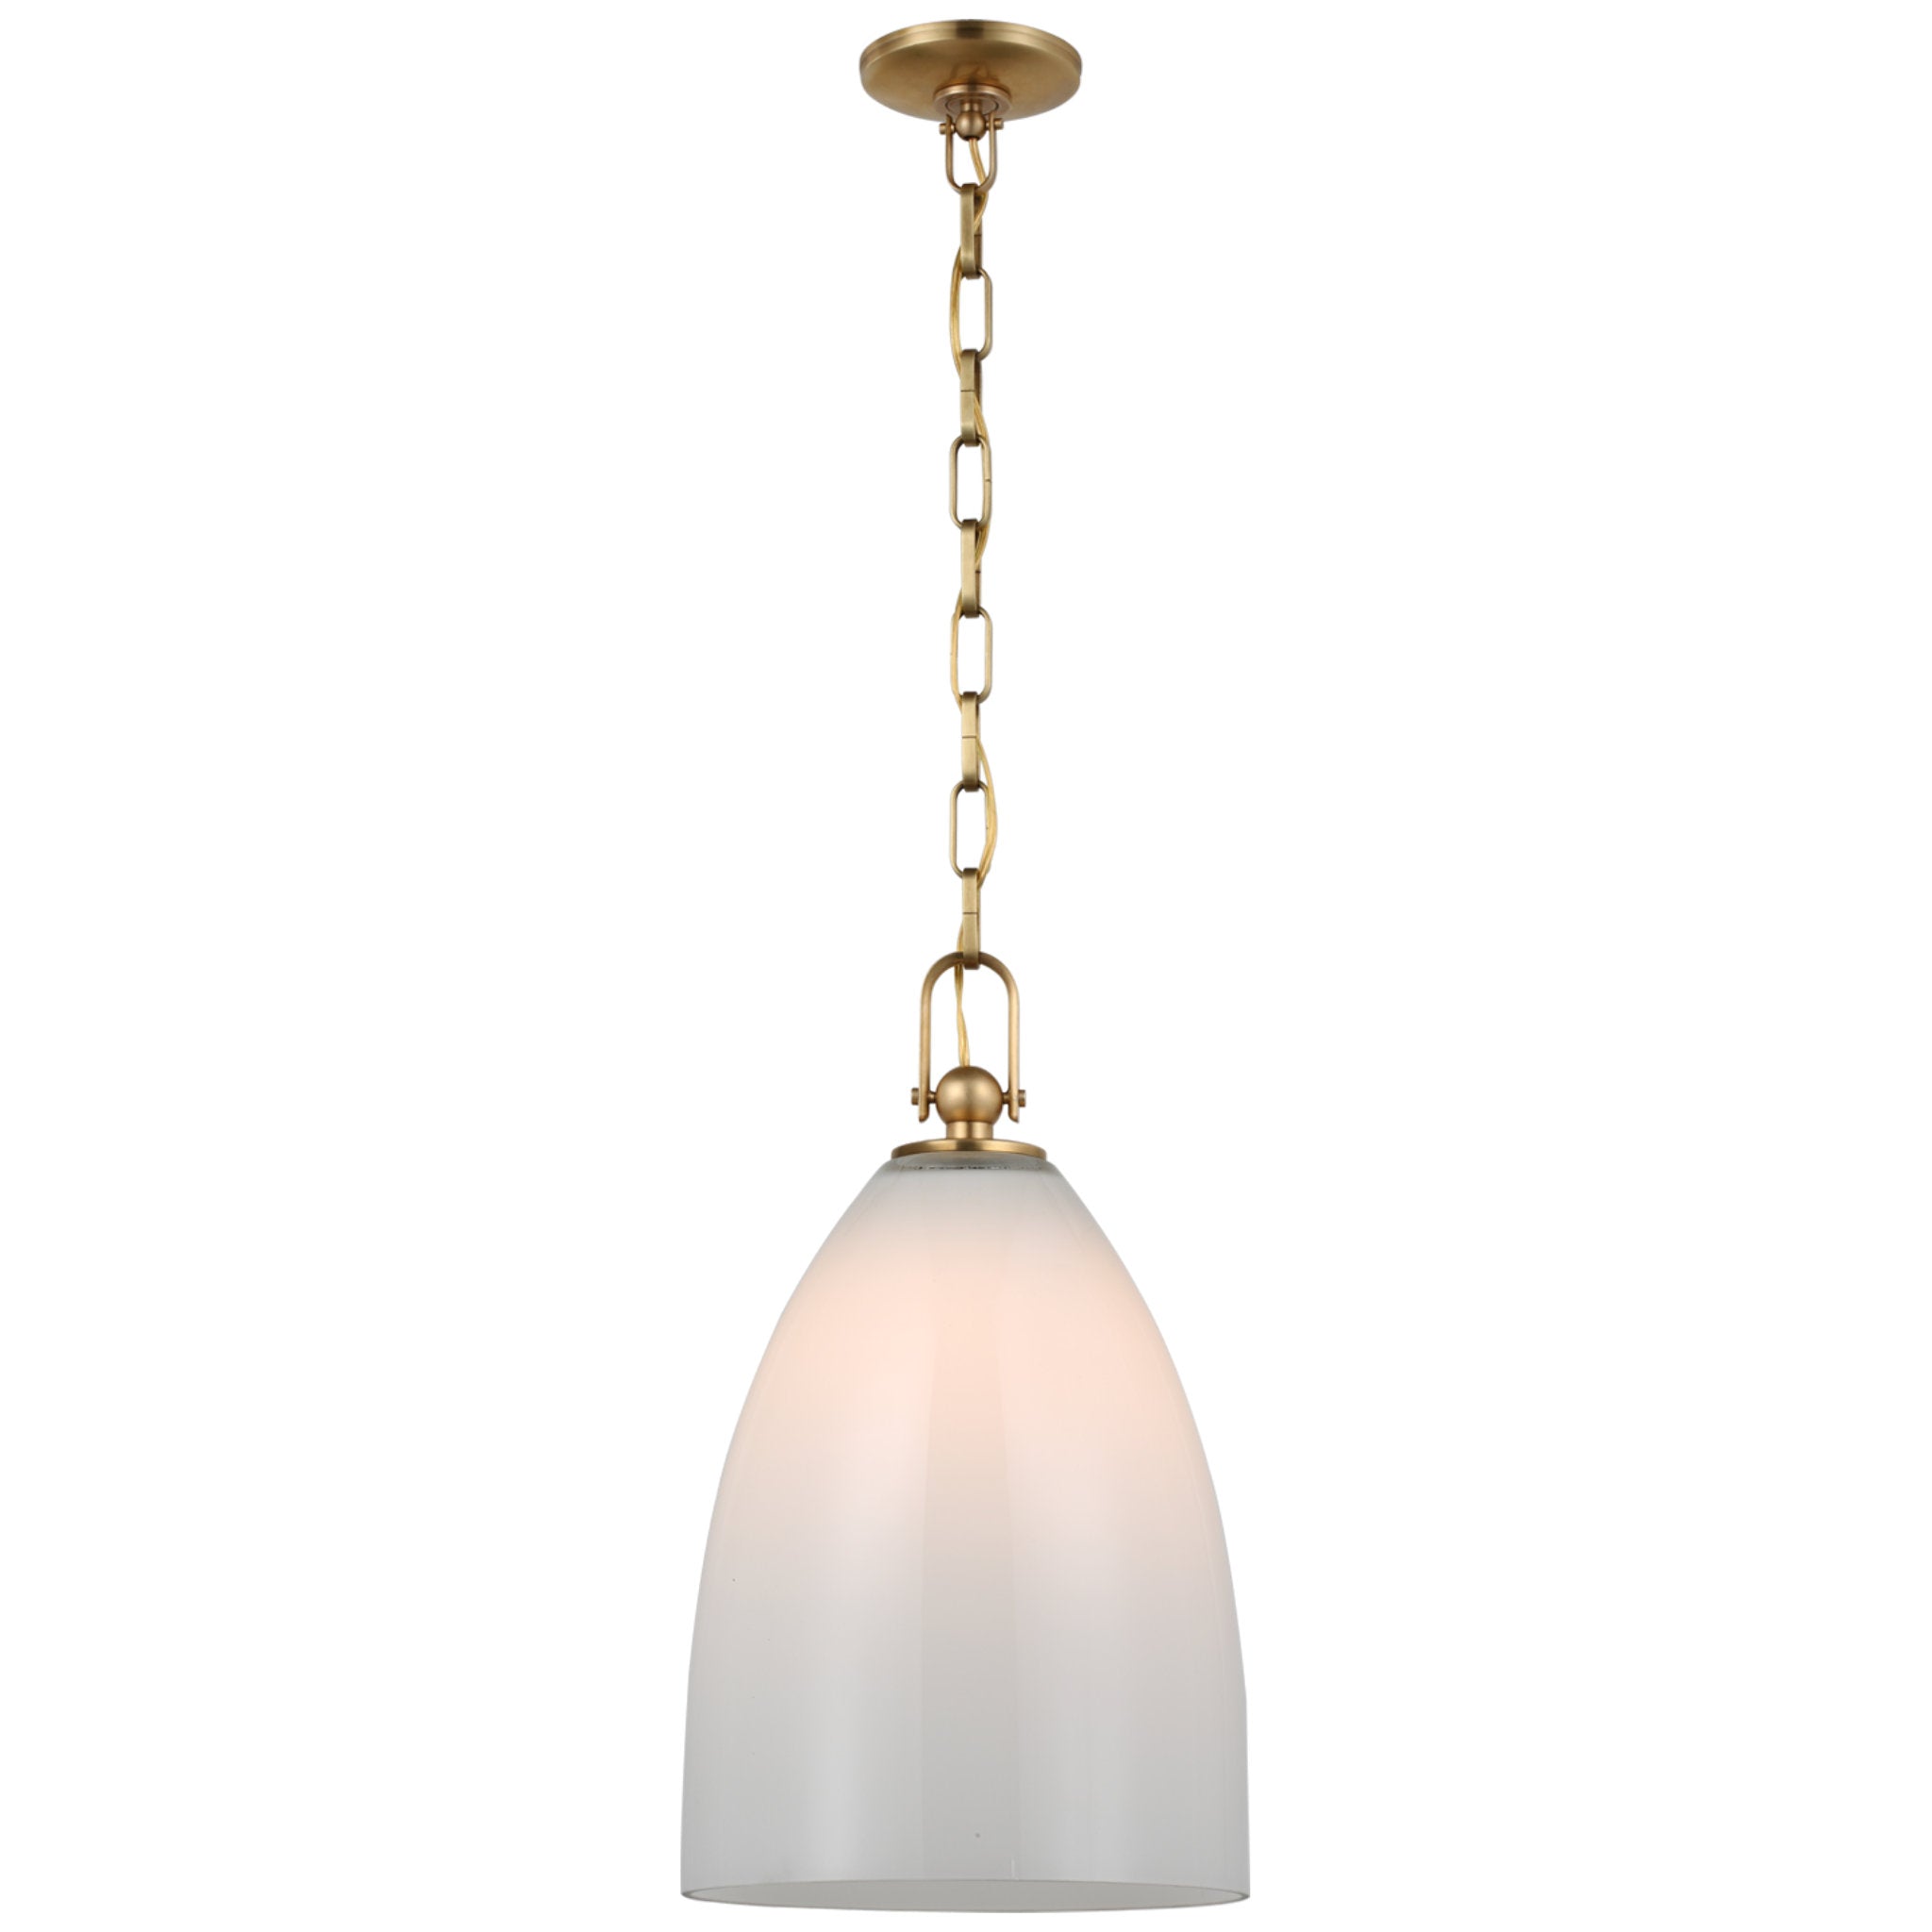 Chapman & Myers Andros Large Pendant in Antique-Burnished Brass with White Glass